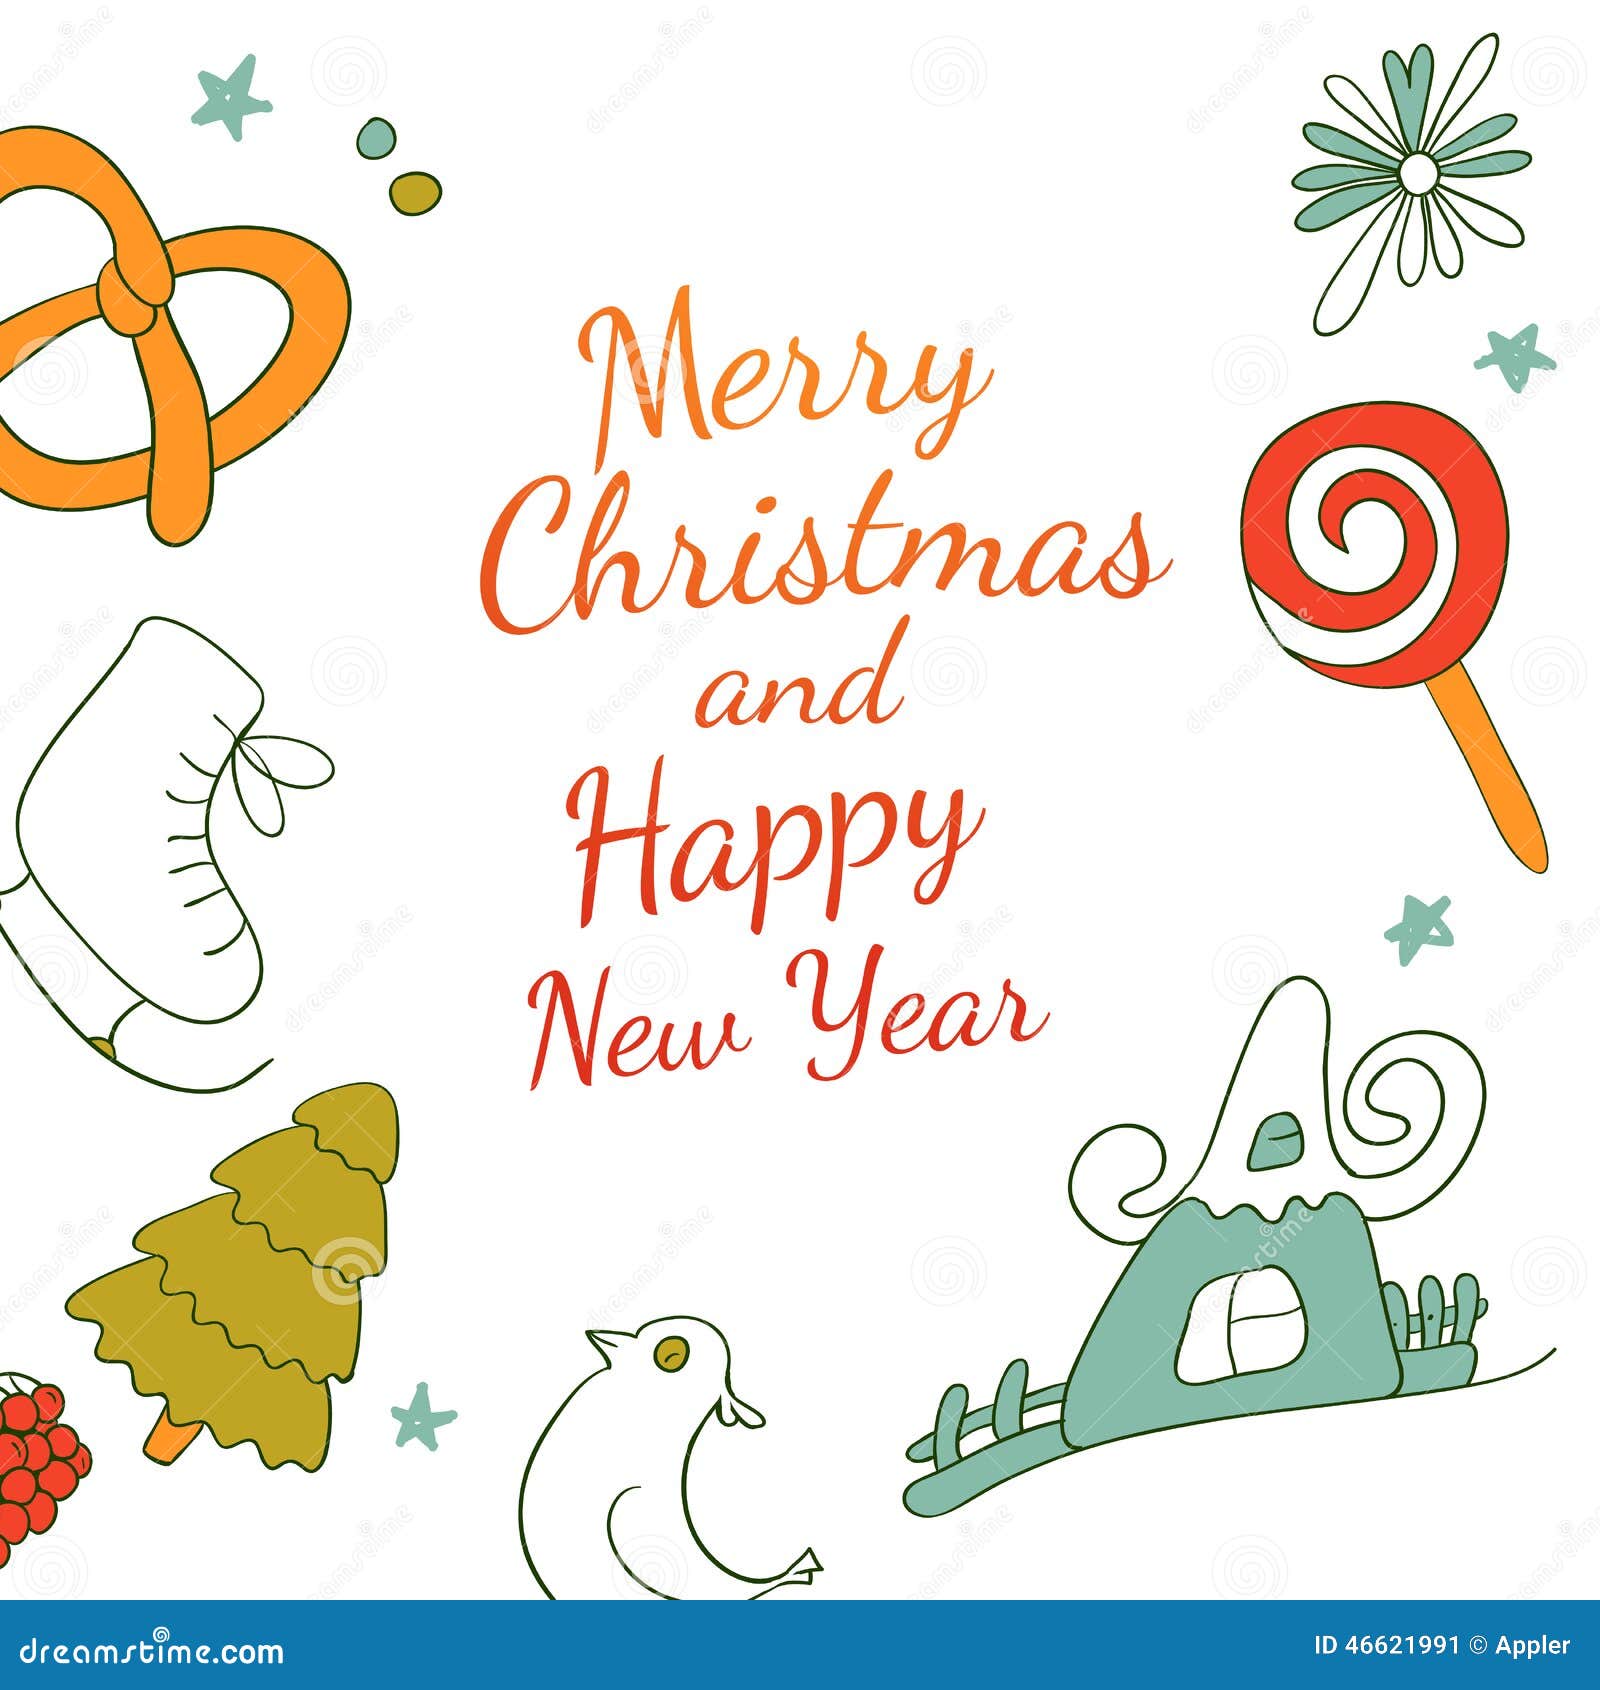 Merry Christmas Text Vector Design Images, Doodle Style Merry Christmas Card  With Text Hand Drawn, Christmas Drawing, Car Drawing, Merry Christmas  Drawing PNG Image For Free Download